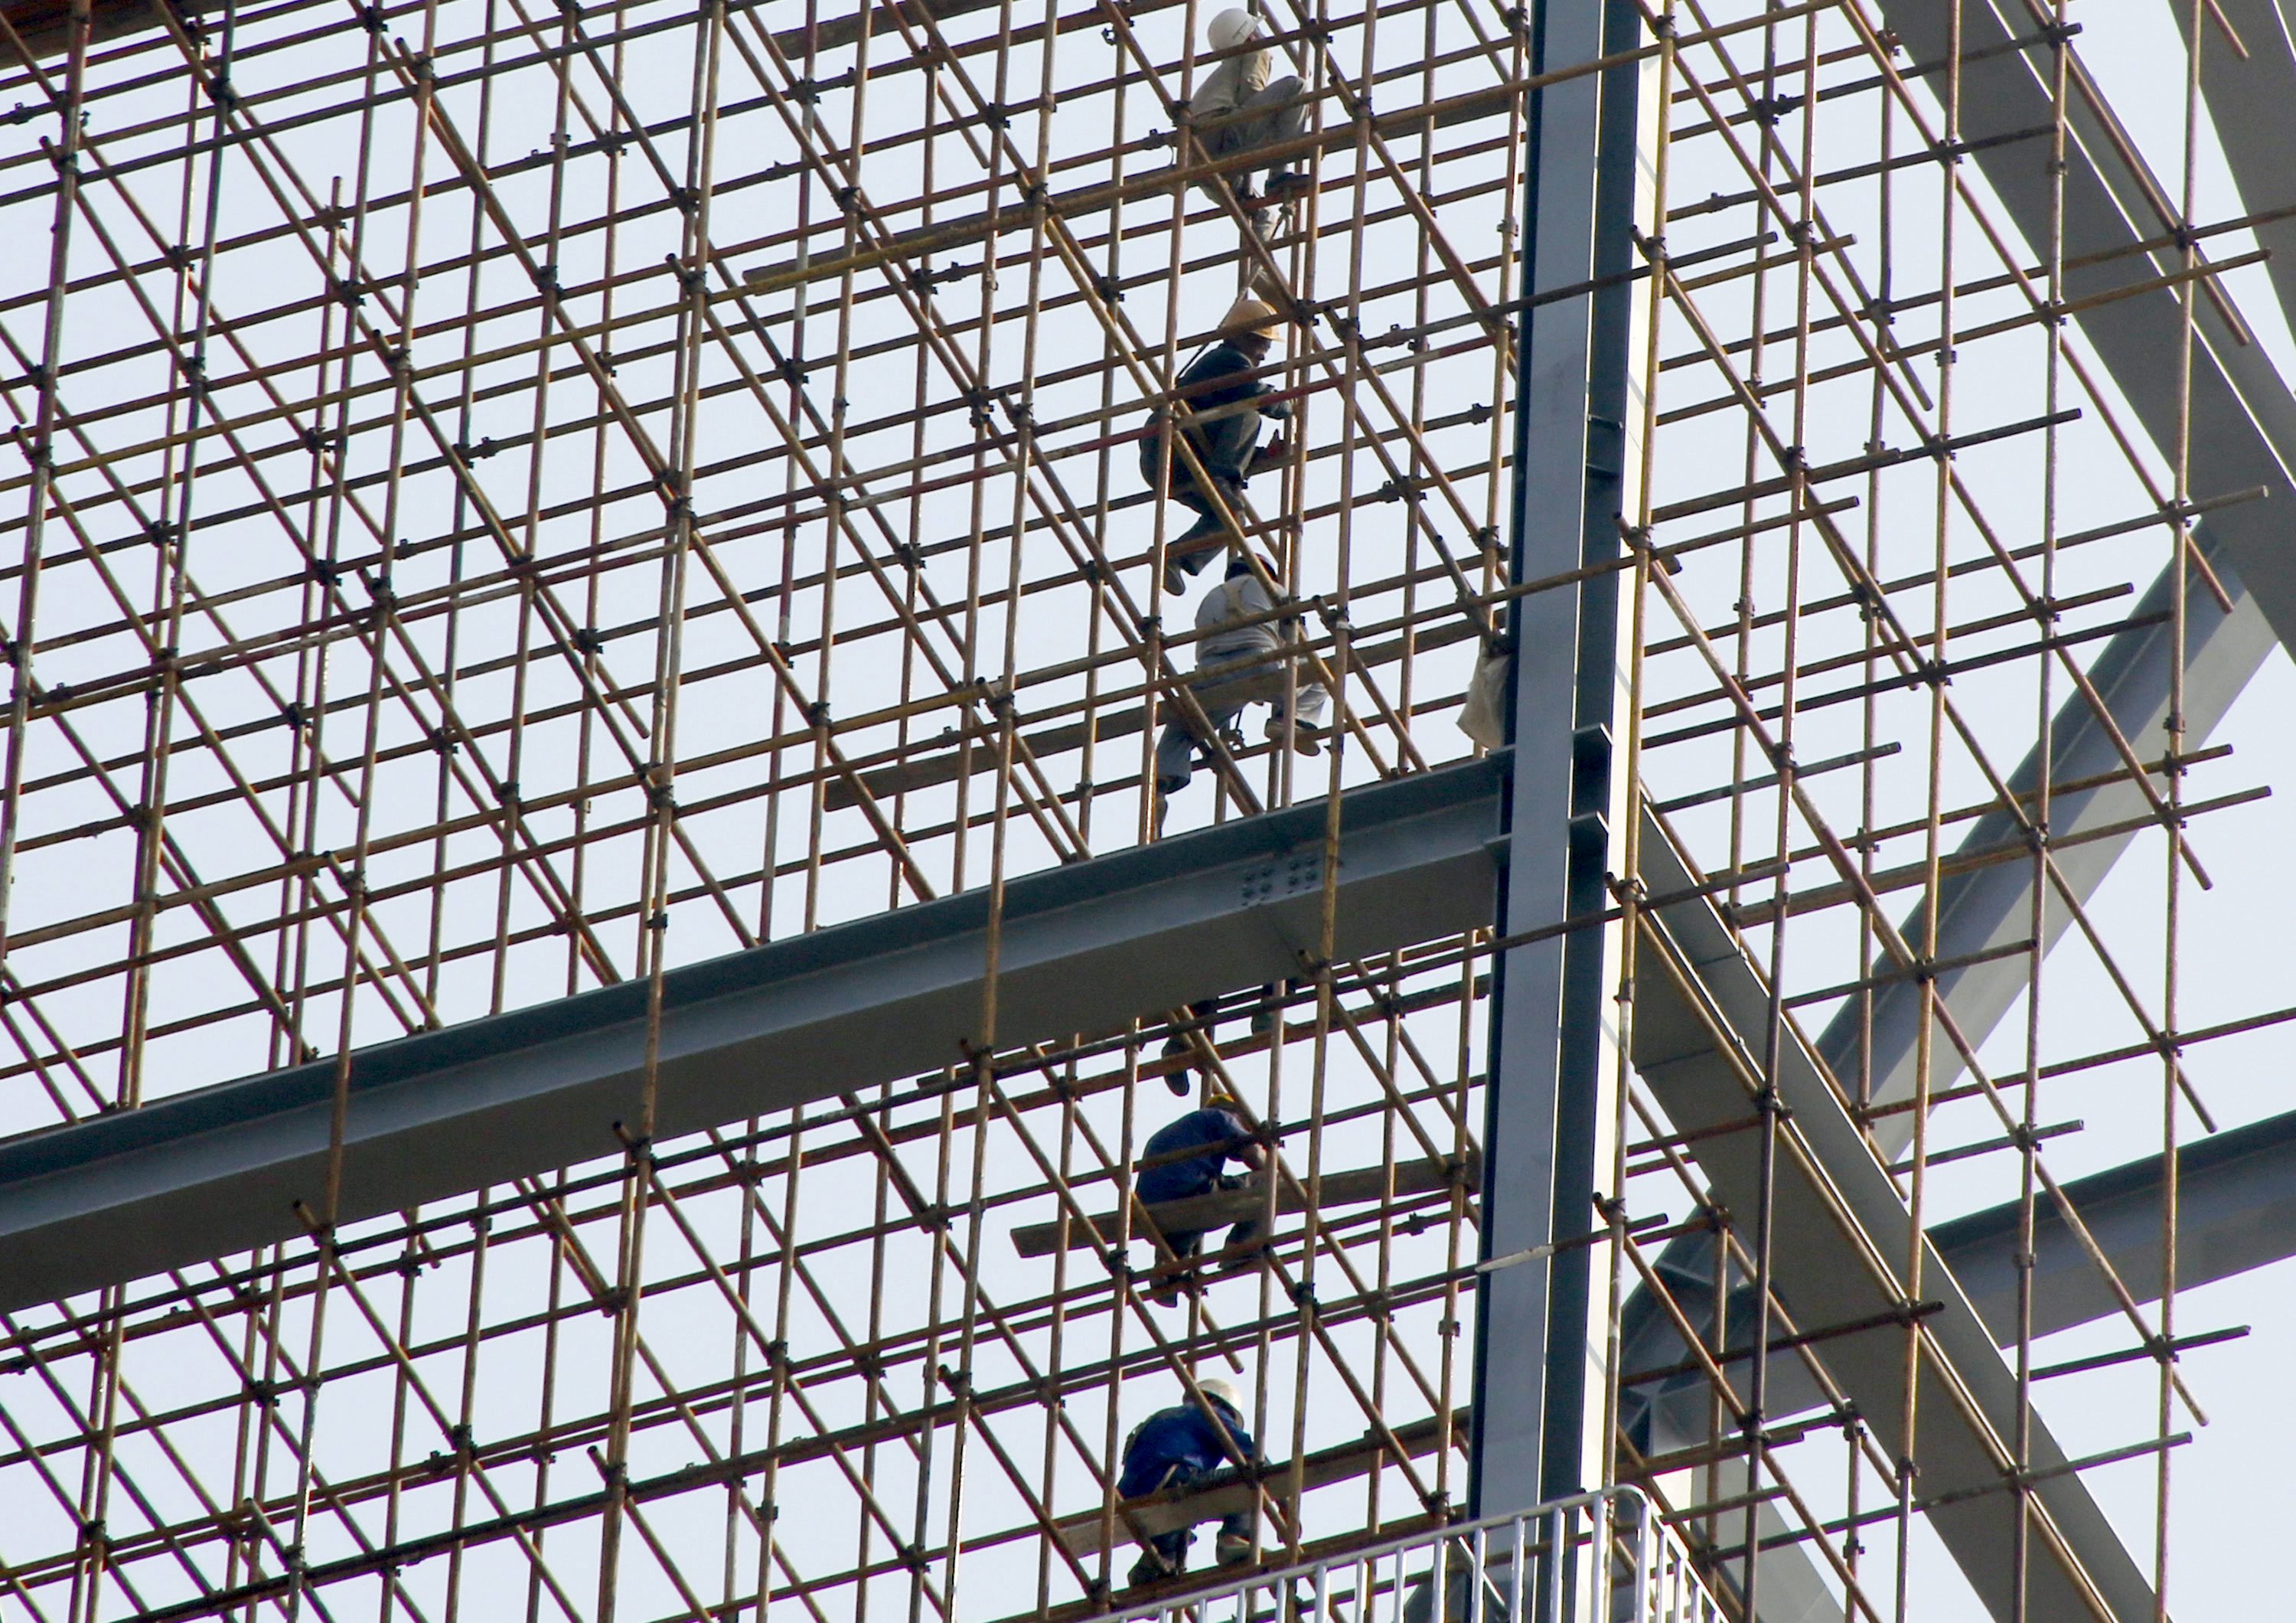 Labourers work on scaffolding of a construction site of a residential and commercial complex in Beijing, China, September 18, 2015. Home prices in China rose for a fourth consecutive month in August, offering hope that the ailing property sector is becoming less of a drag on the slowing economy. REUTERS/Kim Kyung-Hoon